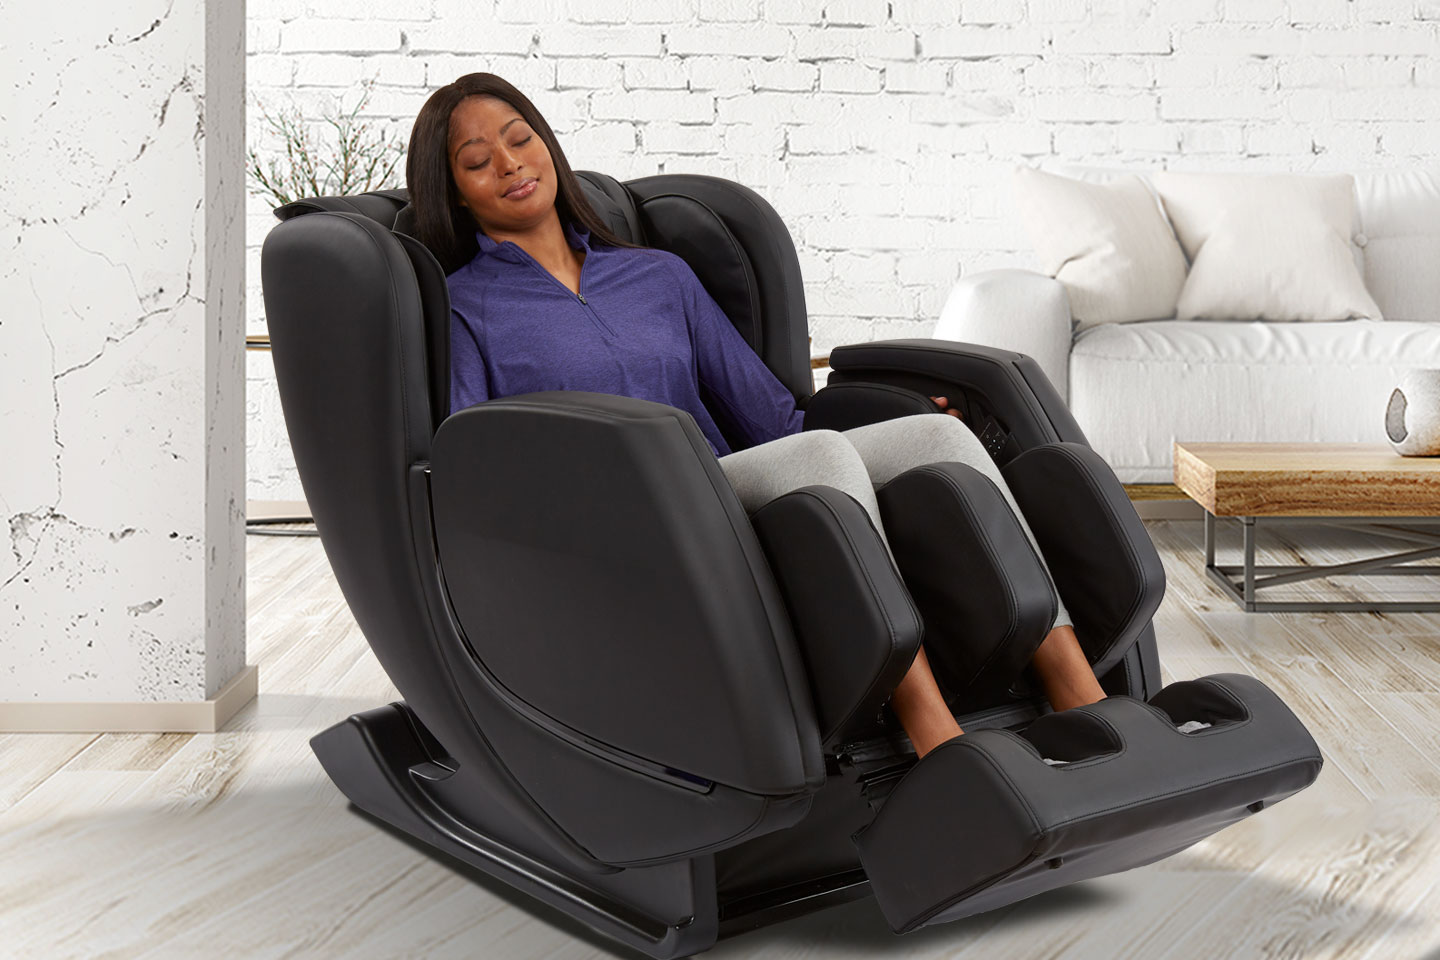 REVIVAL Zero Gravity Massage Chair by Sharper Image Massage Chair by Infinity | LAIDBACK